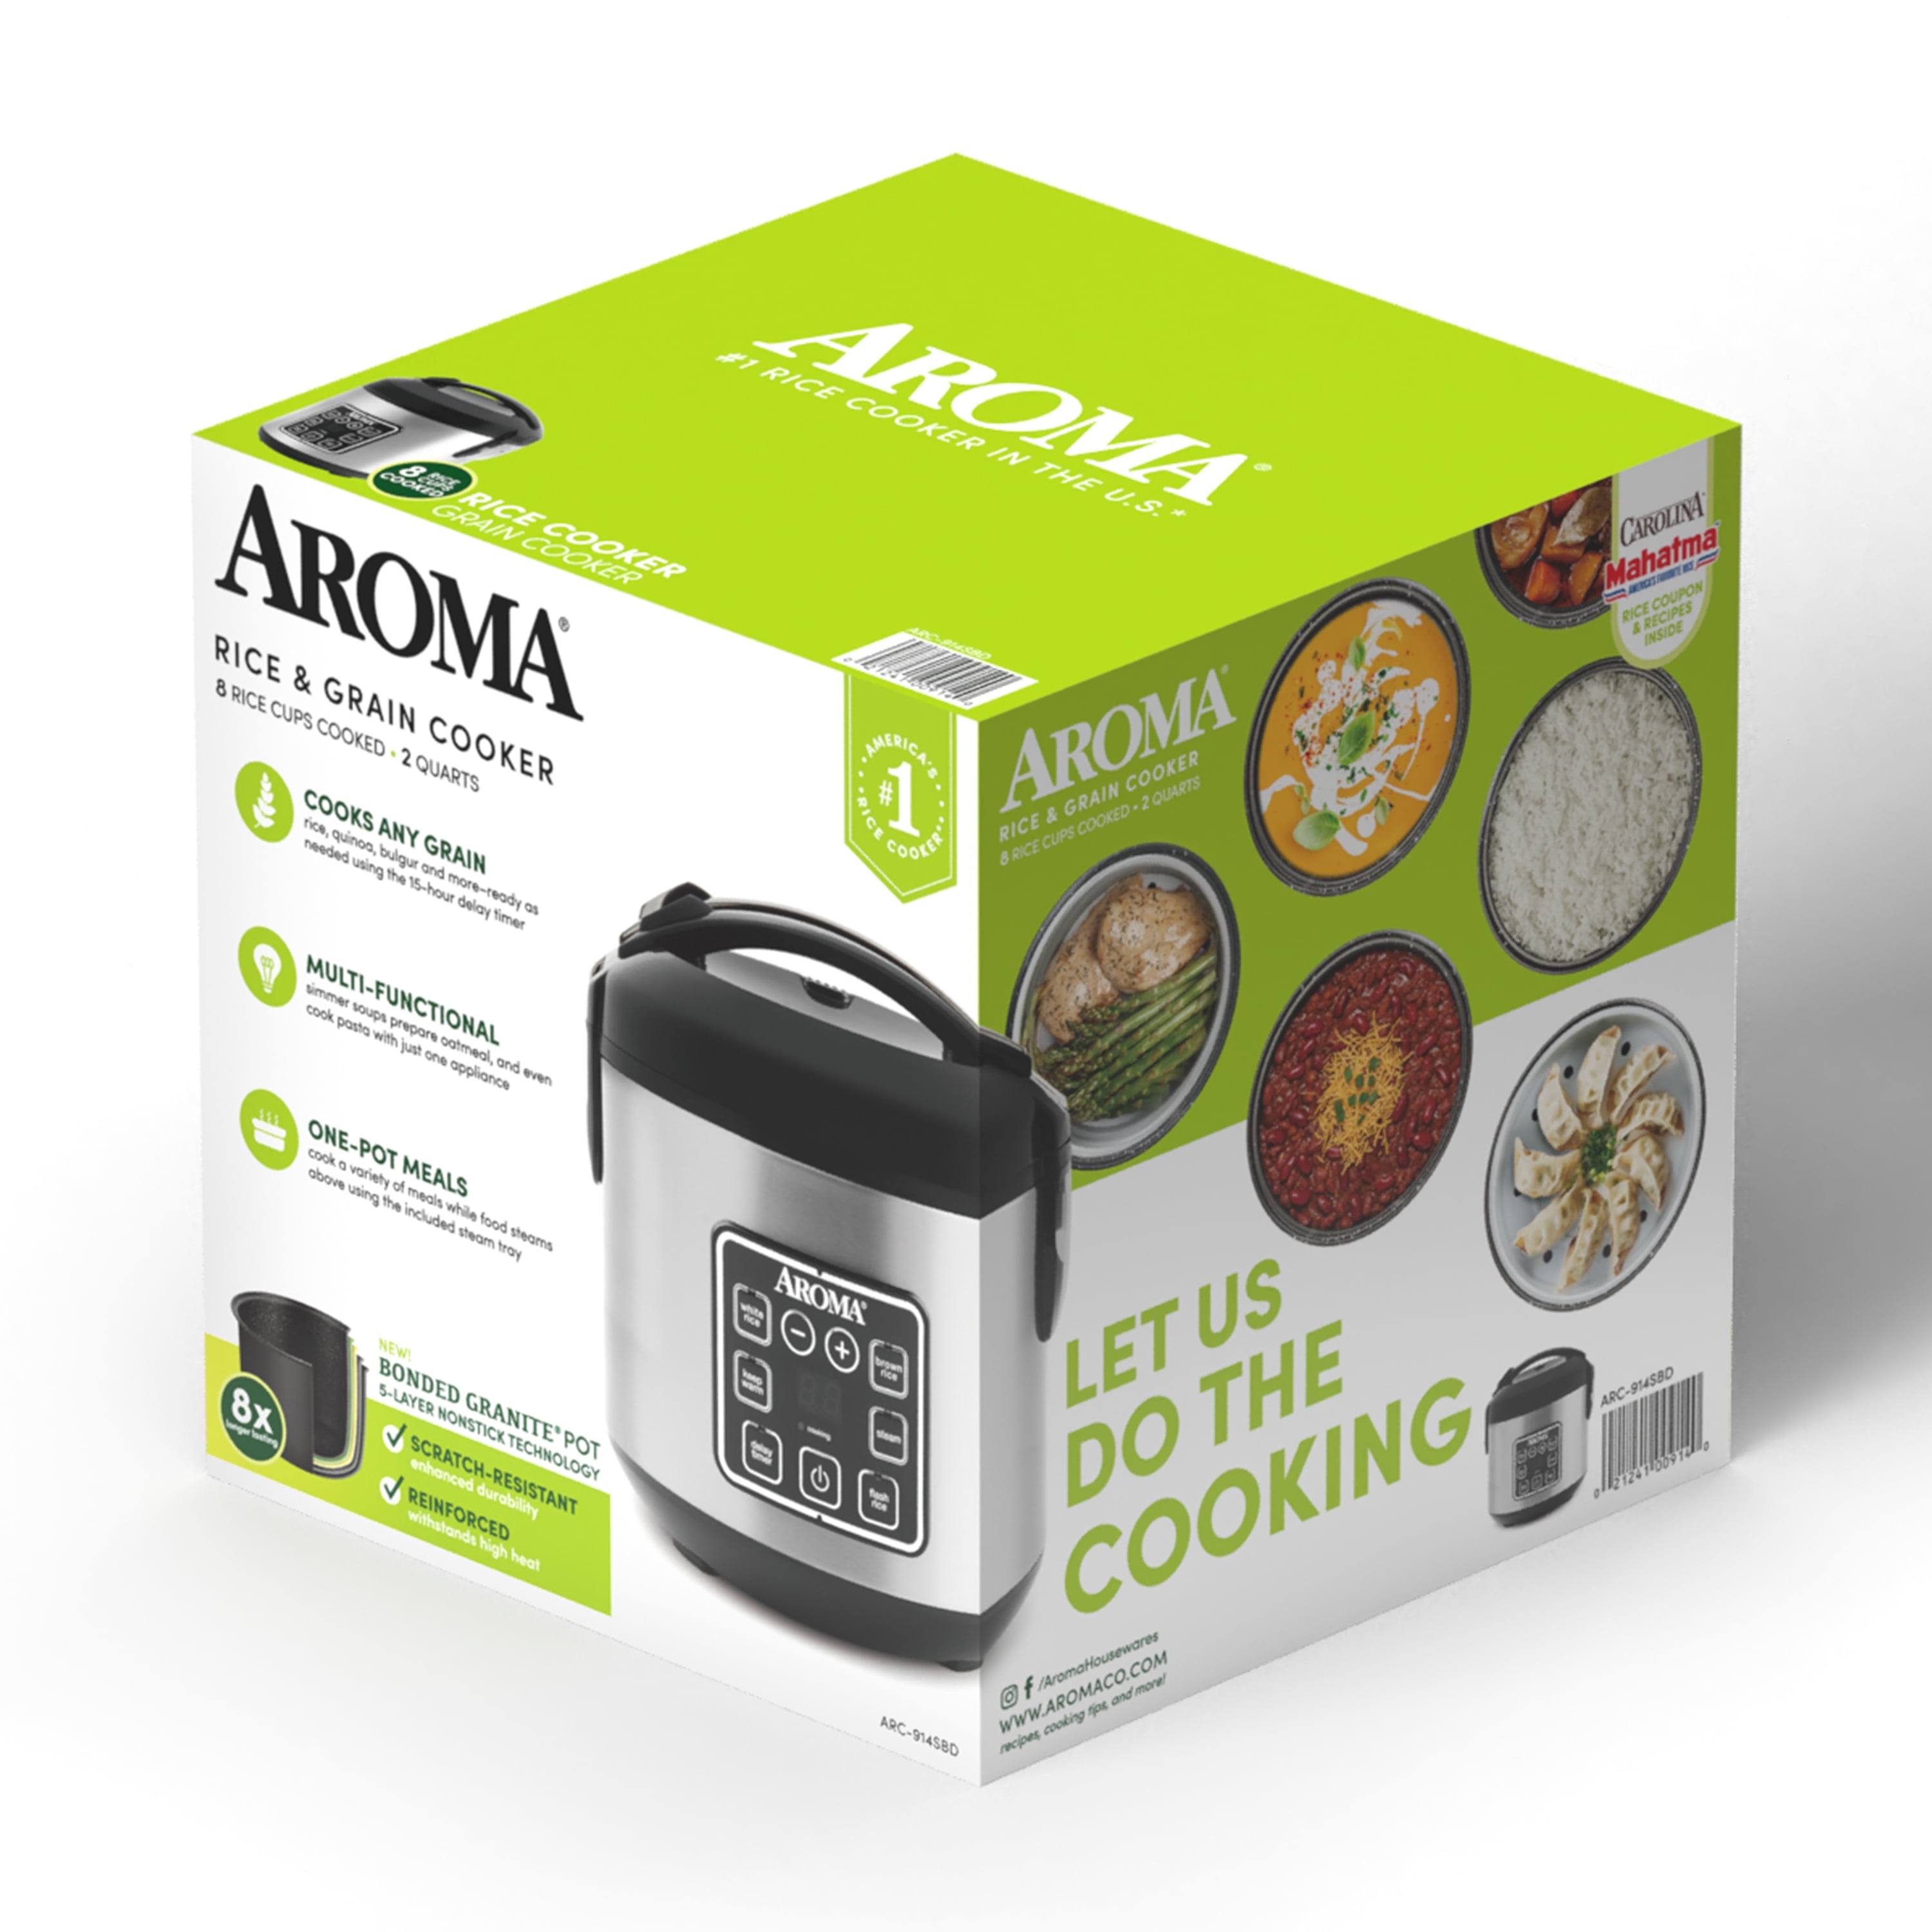 Aroma ARC-914SBD 4-Cup Digital Rice Cooker and Steamer Stainless Steel